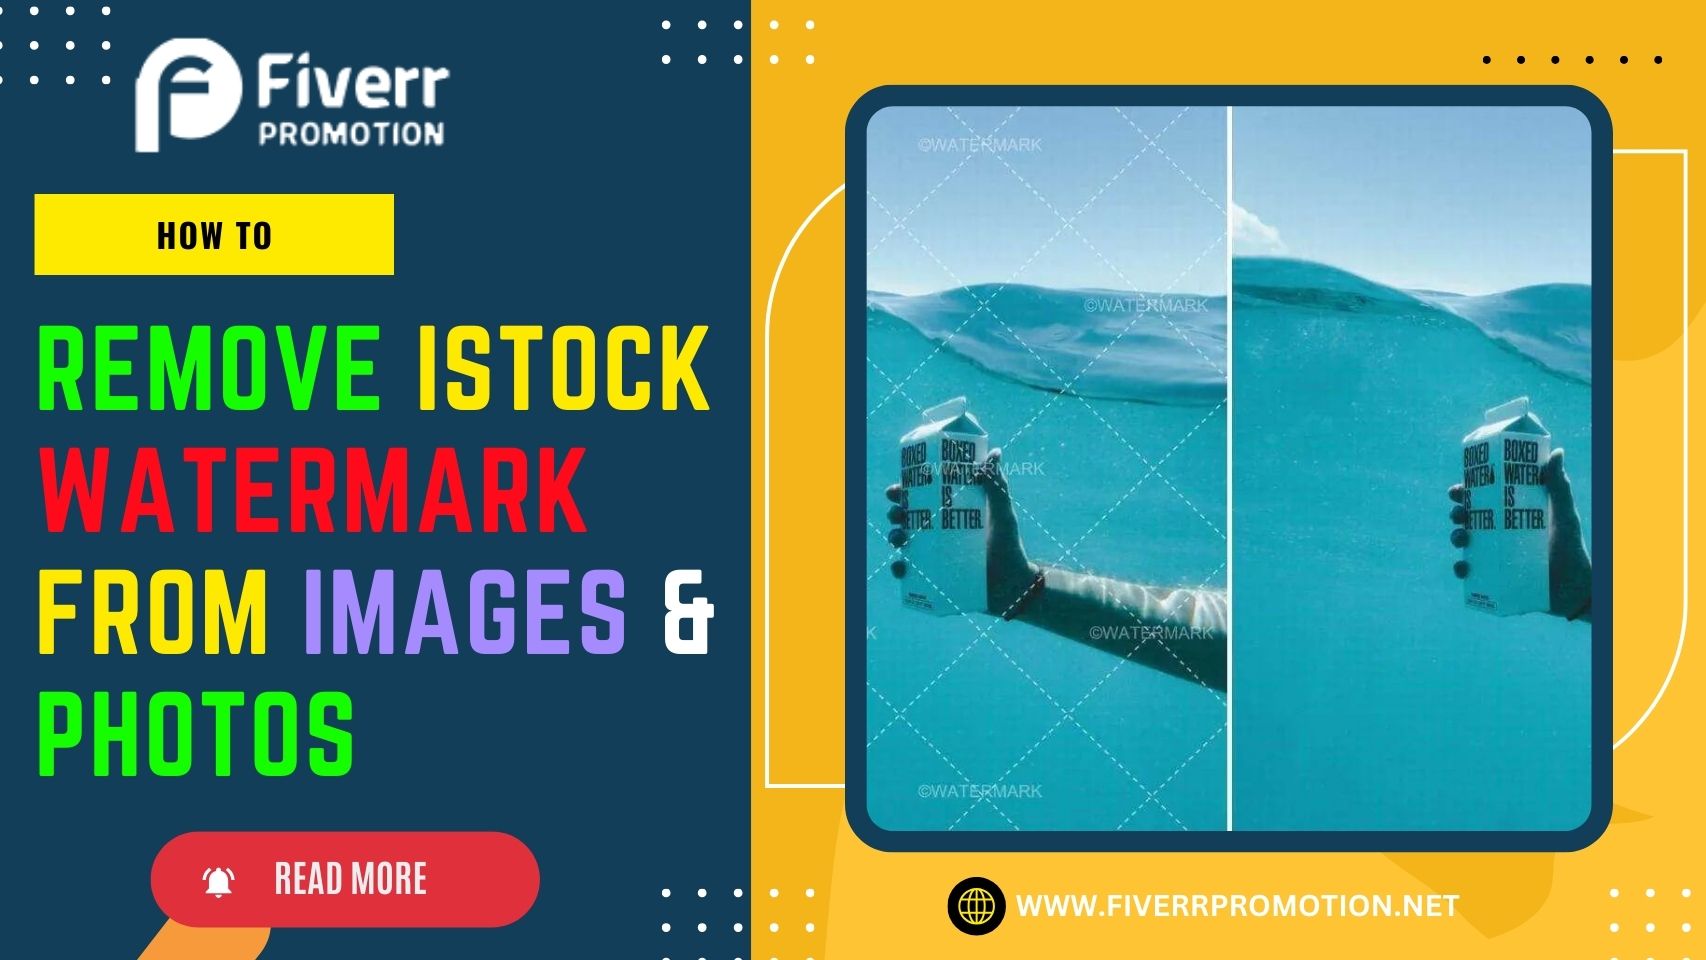 How to Remove iStock Watermark from Images & Photos